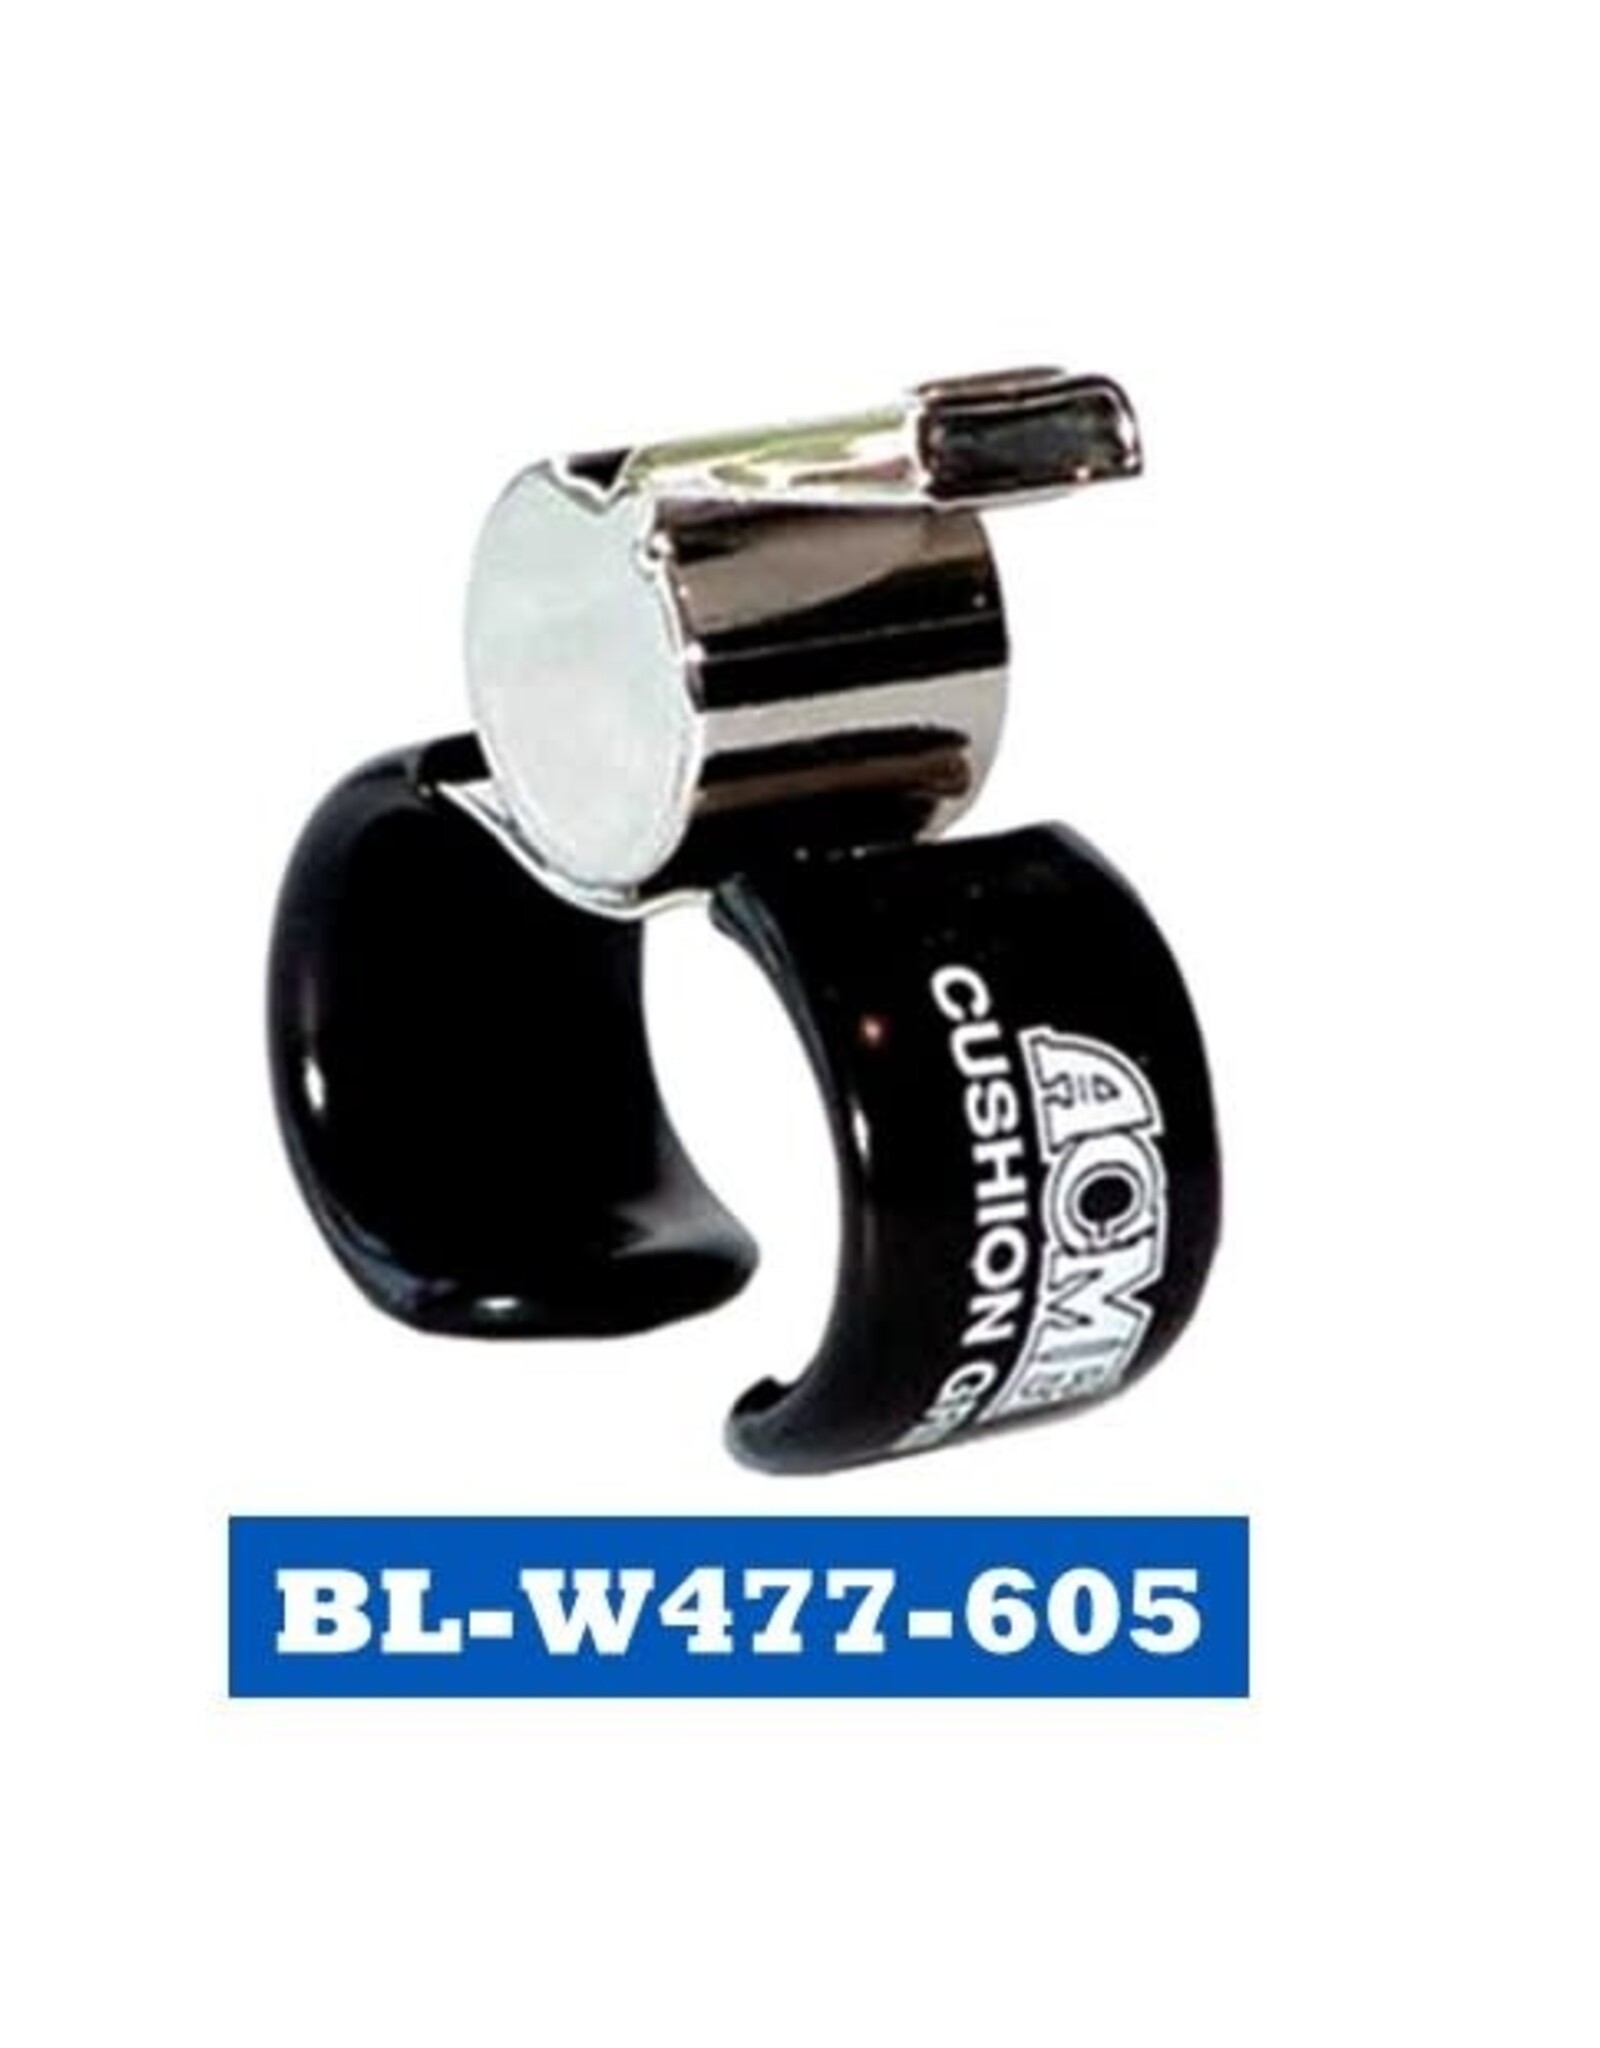 BLUE SPORTS SMALL ADJUSTABLE FINGERGRIP BRASS WHISTLE